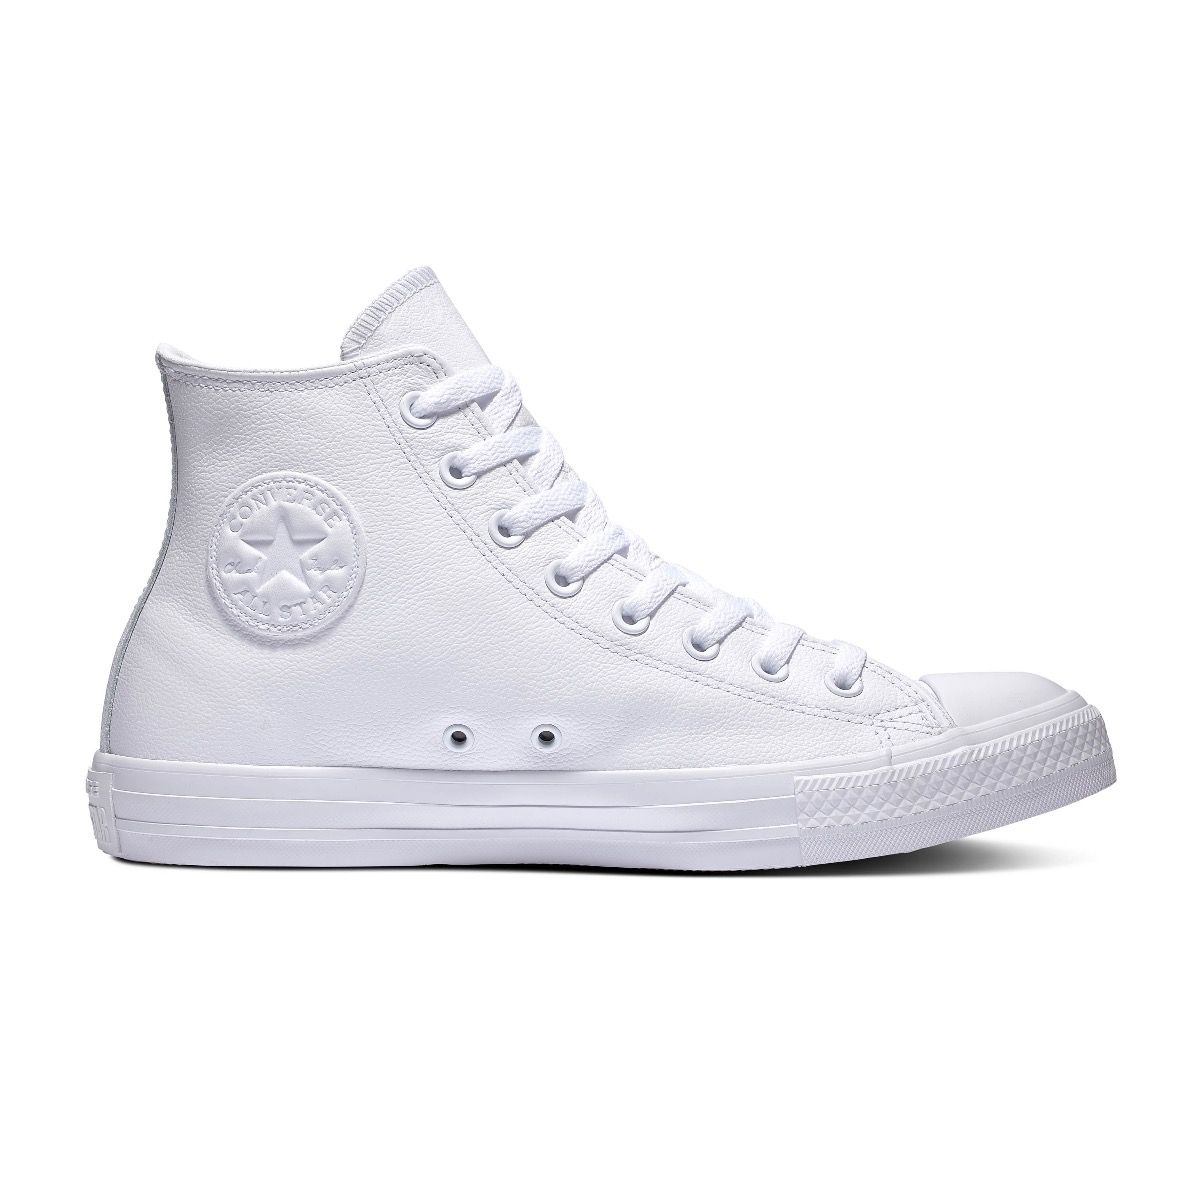 Converse All Stars Leather 1T406 Wit om te zoenen